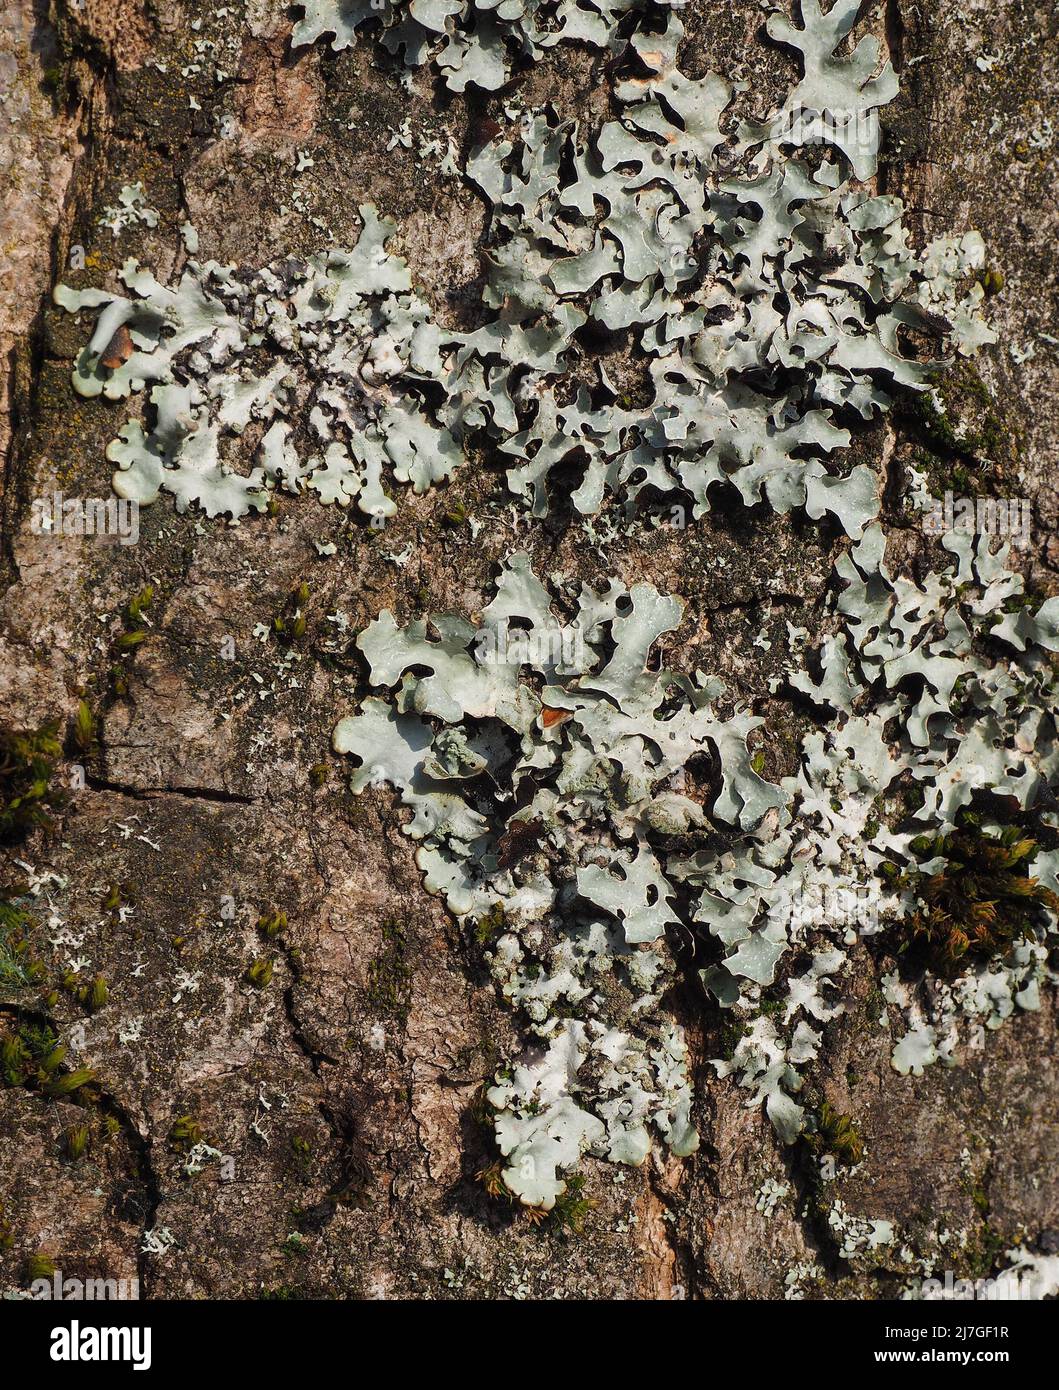 Lichen growing on the bark of a mature tree in a forest in Lancashire, England, UK. Stock Photo